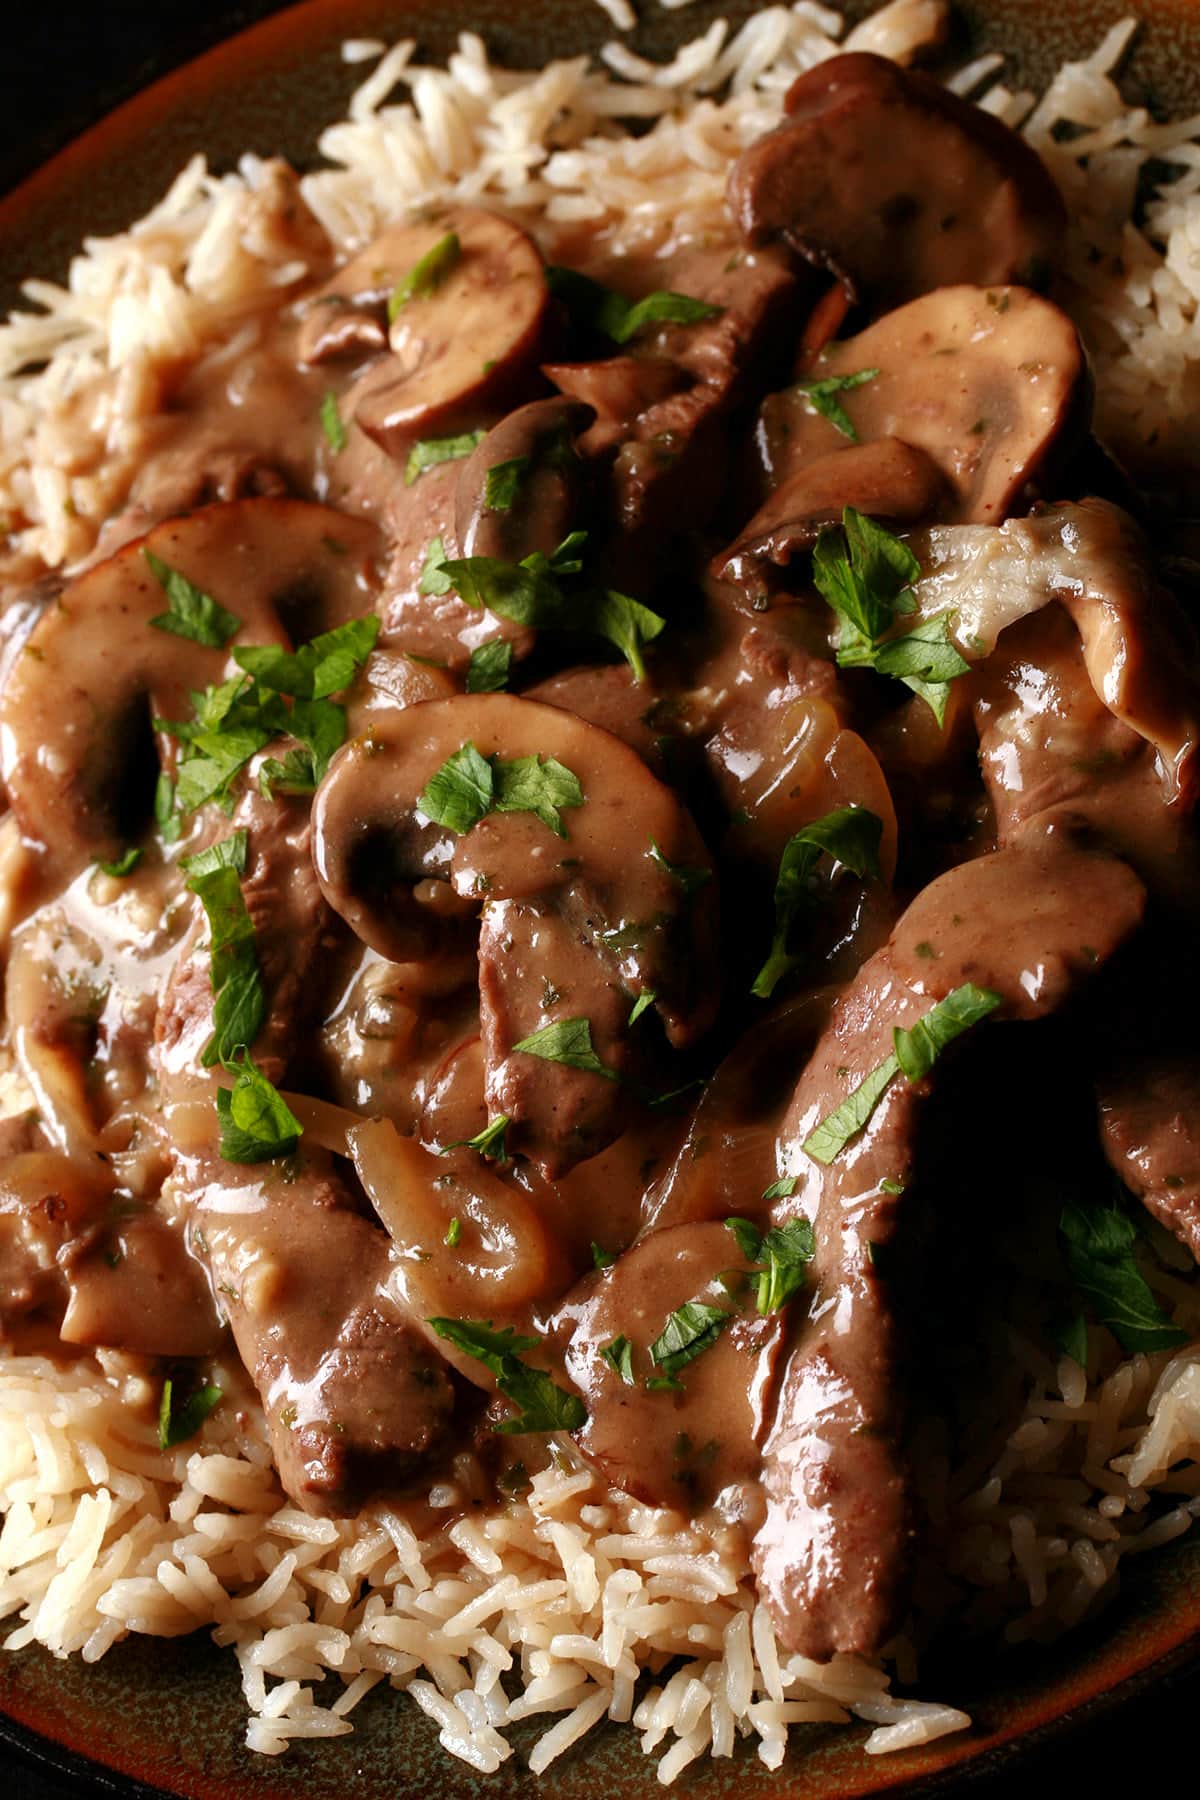 A serving of gluten-free beef stroganoff over a bed of rice.